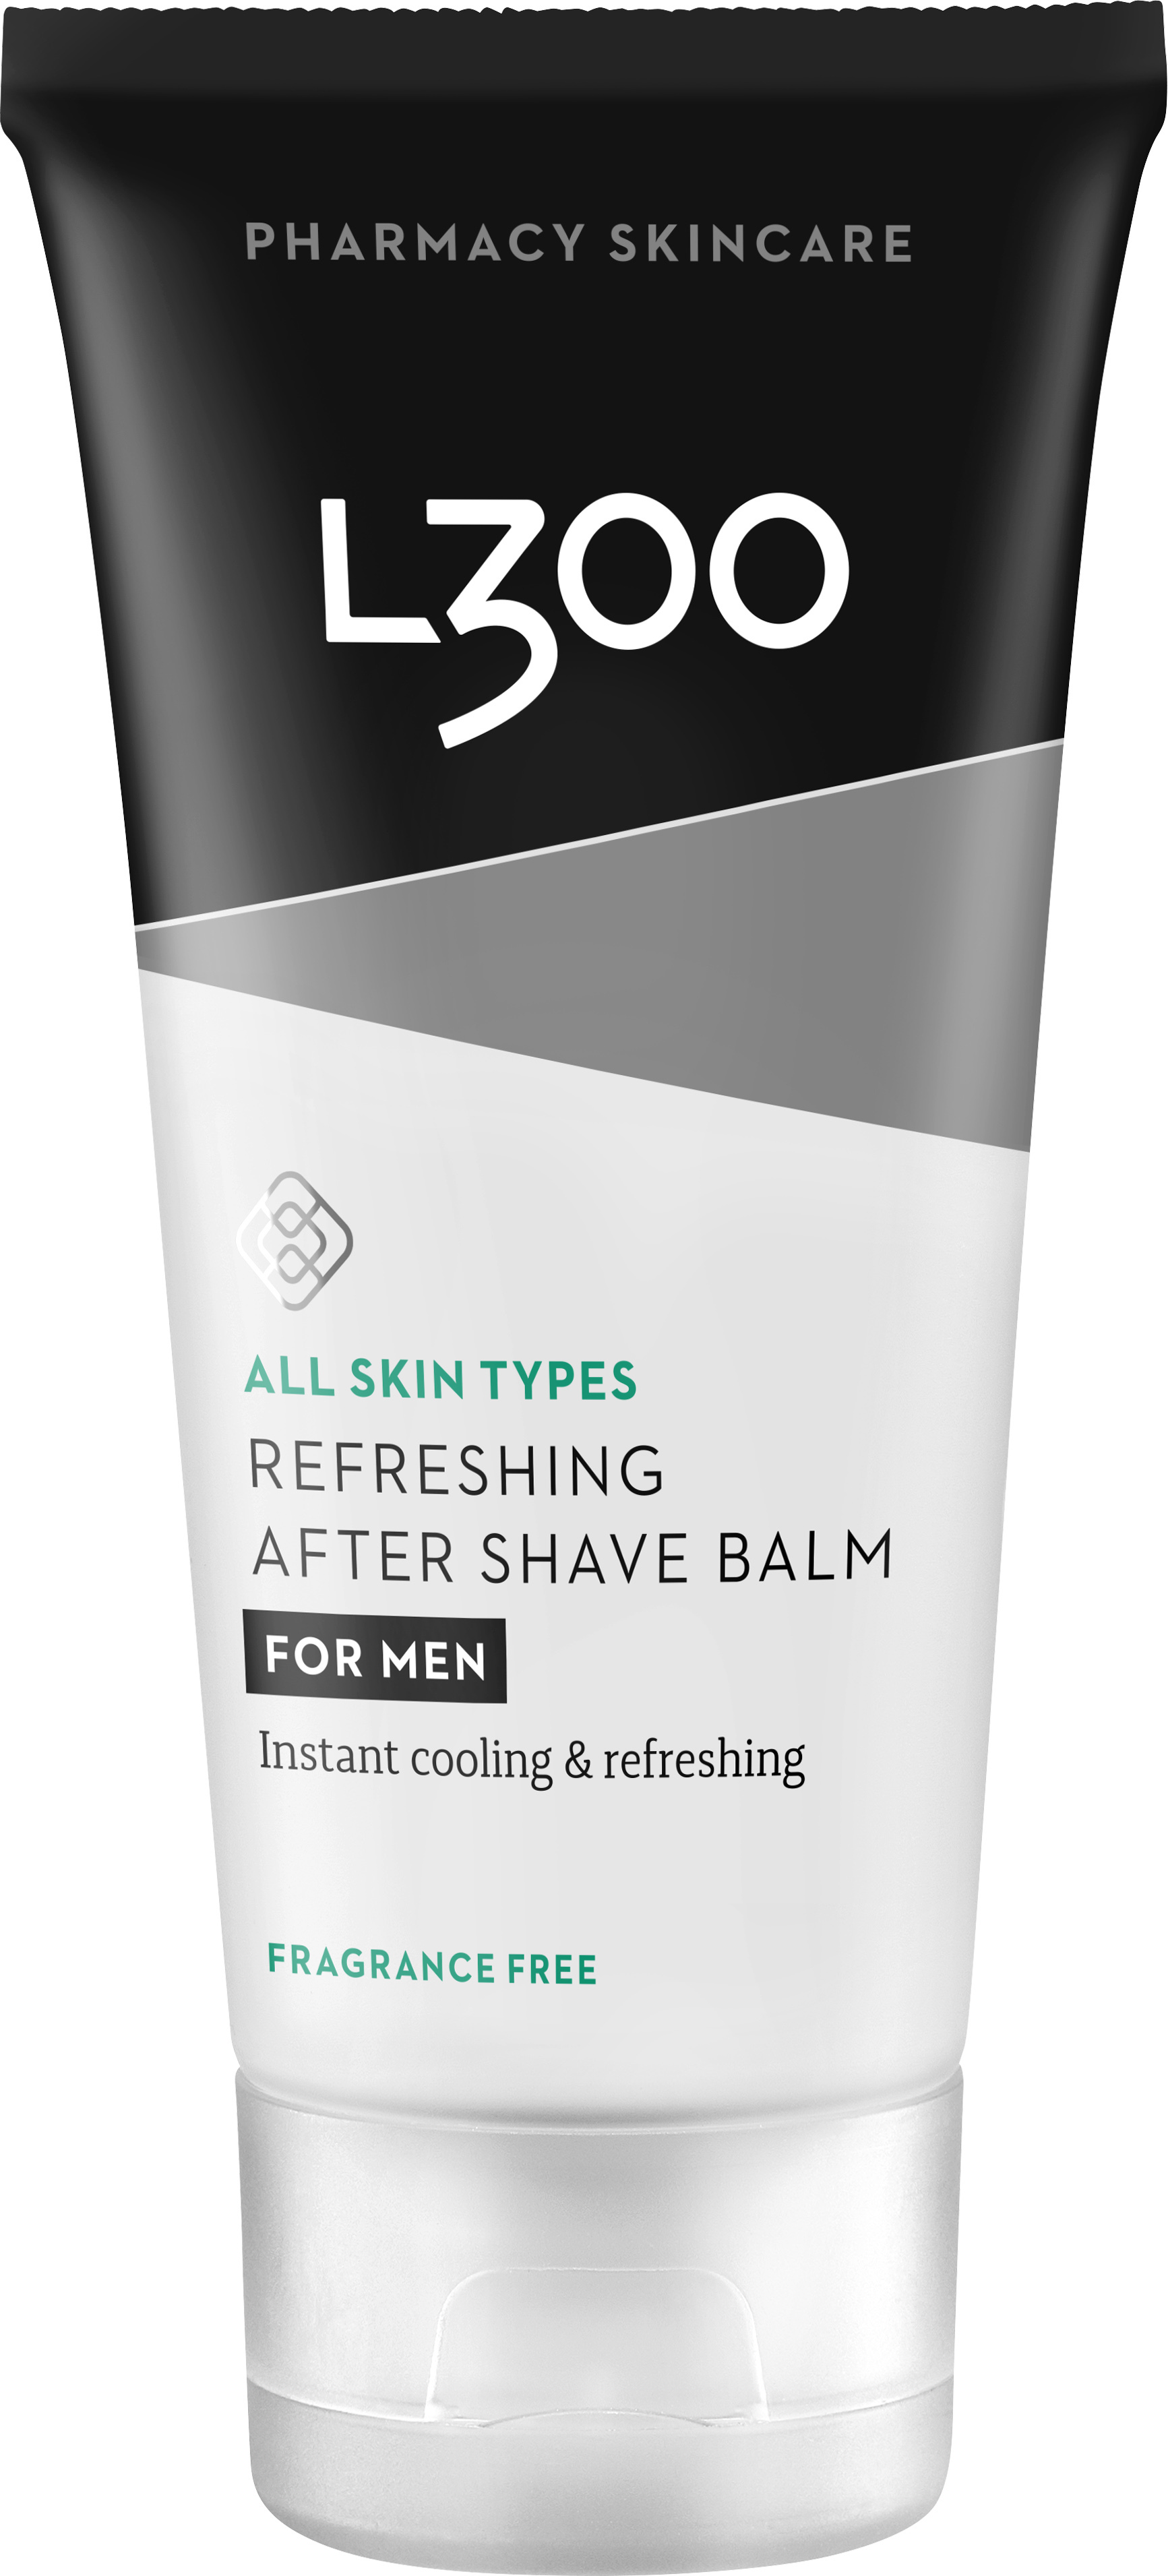 L300 for Men Refreshing After-Shave Balm Oparf 60ml